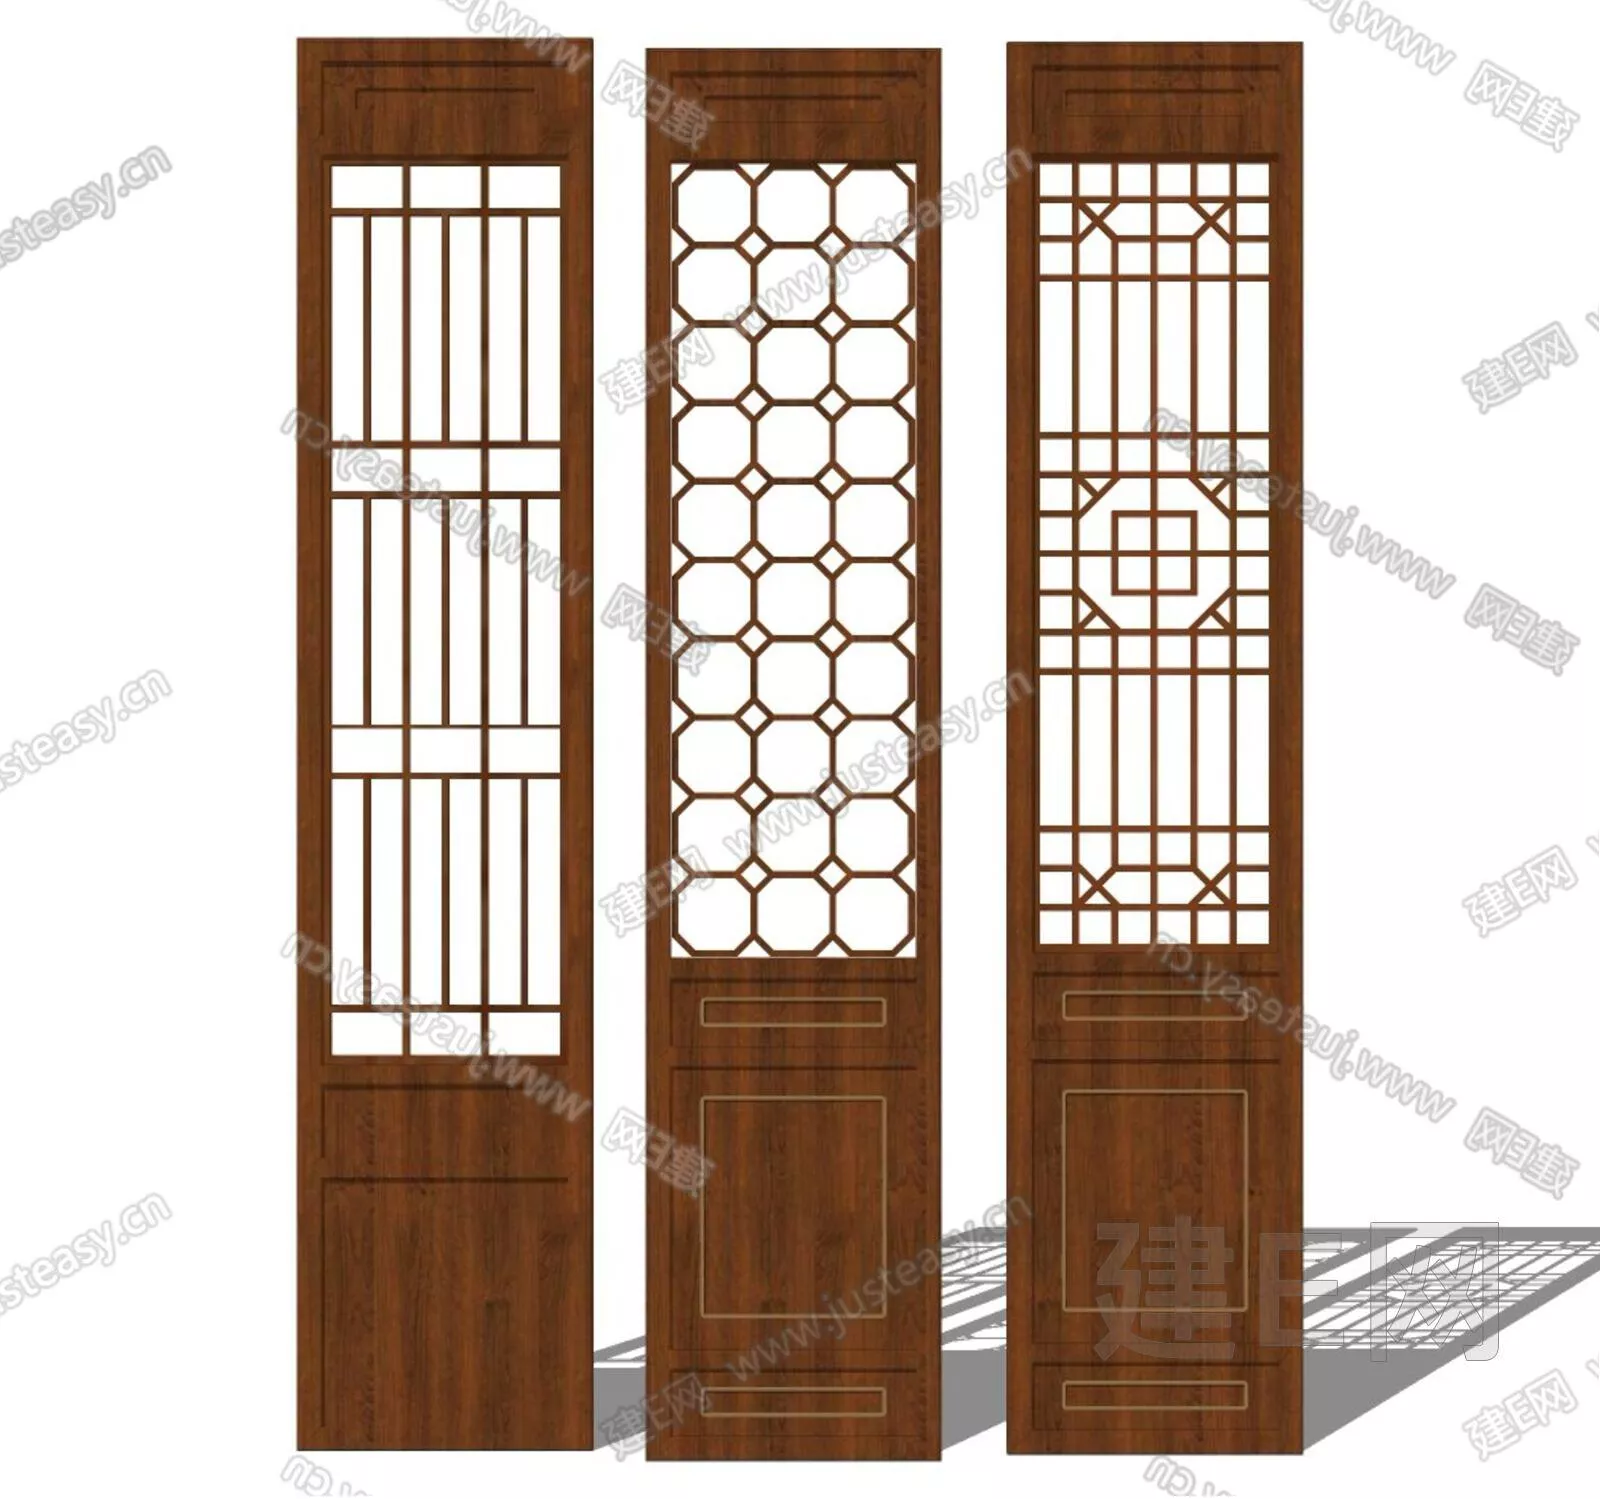 CHINESE PARTITION SCREEN - SKETCHUP 3D MODEL - ENSCAPE - 111624566